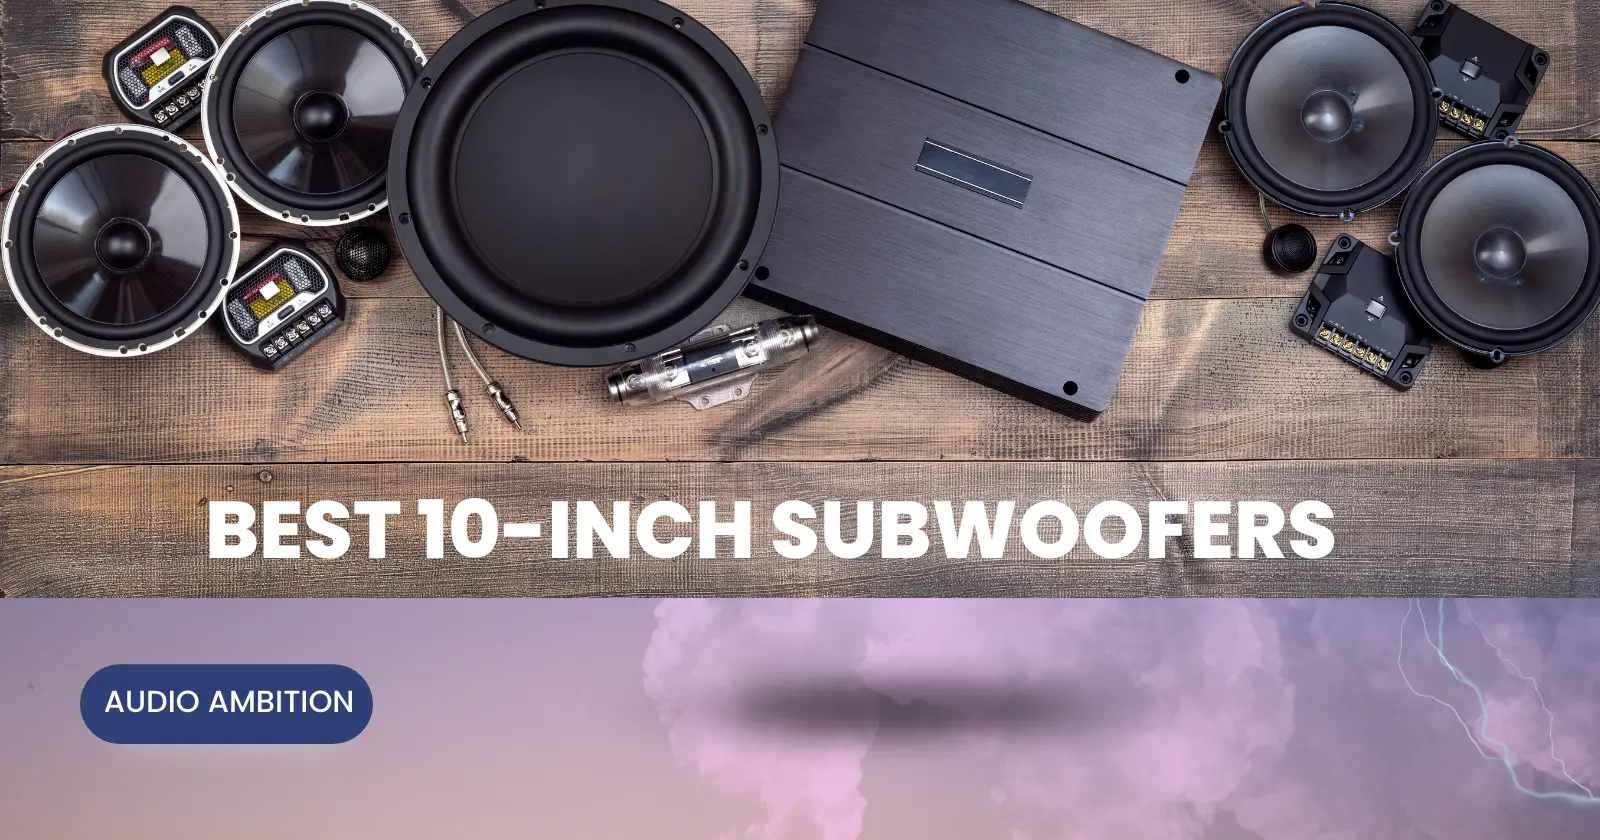 Best 10-Inch Subwoofers